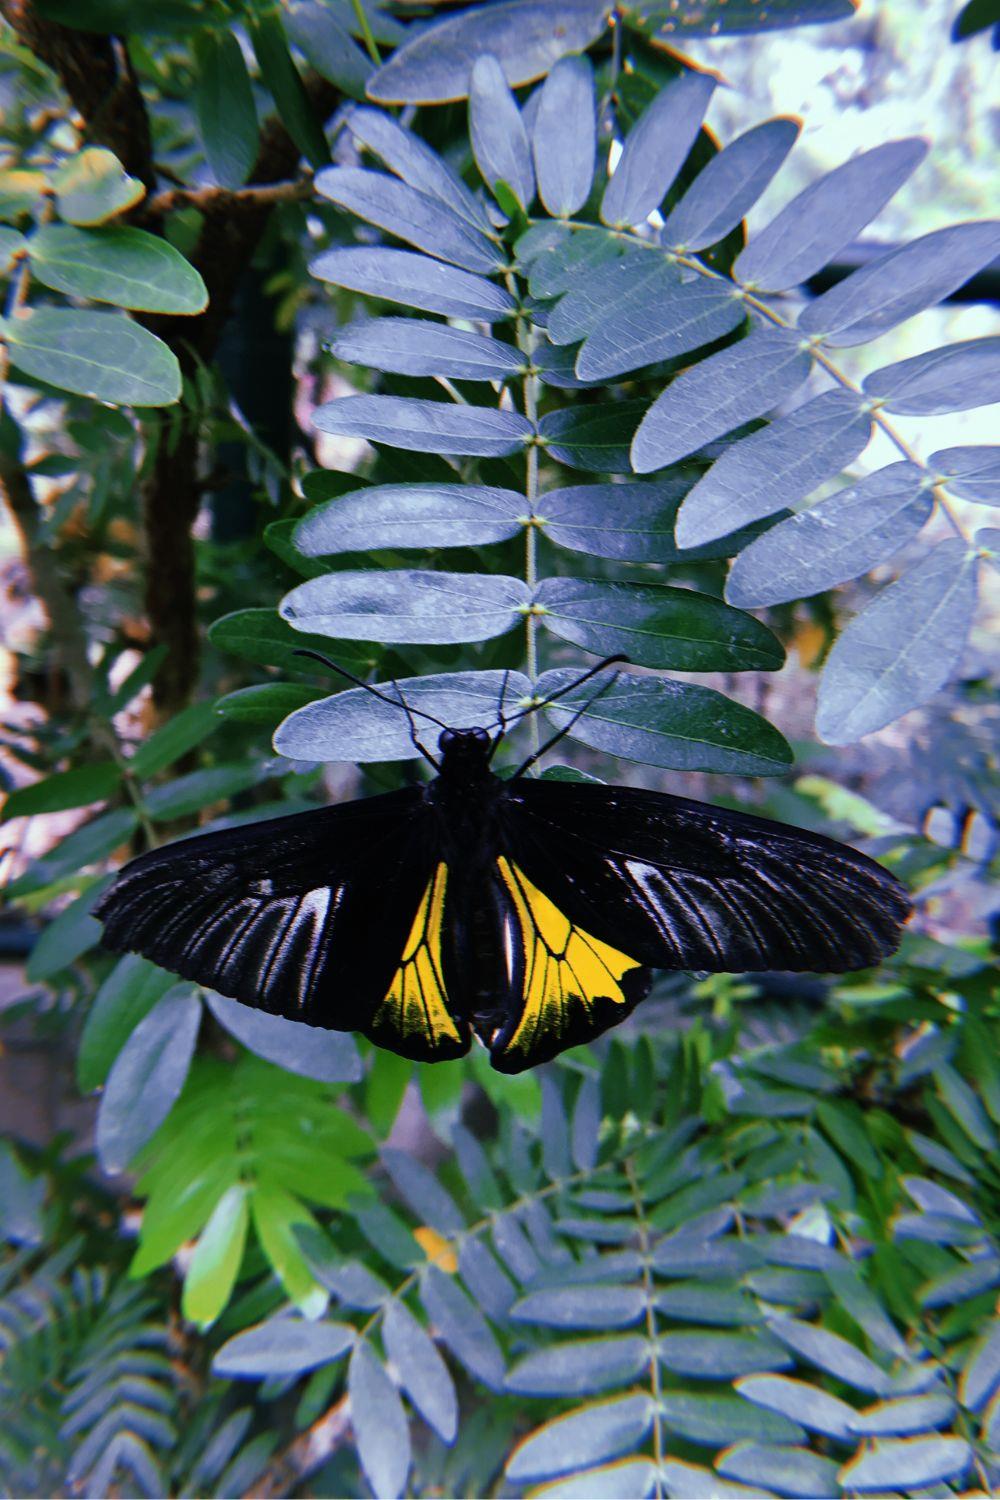 Black and yellow butterfly's meaning